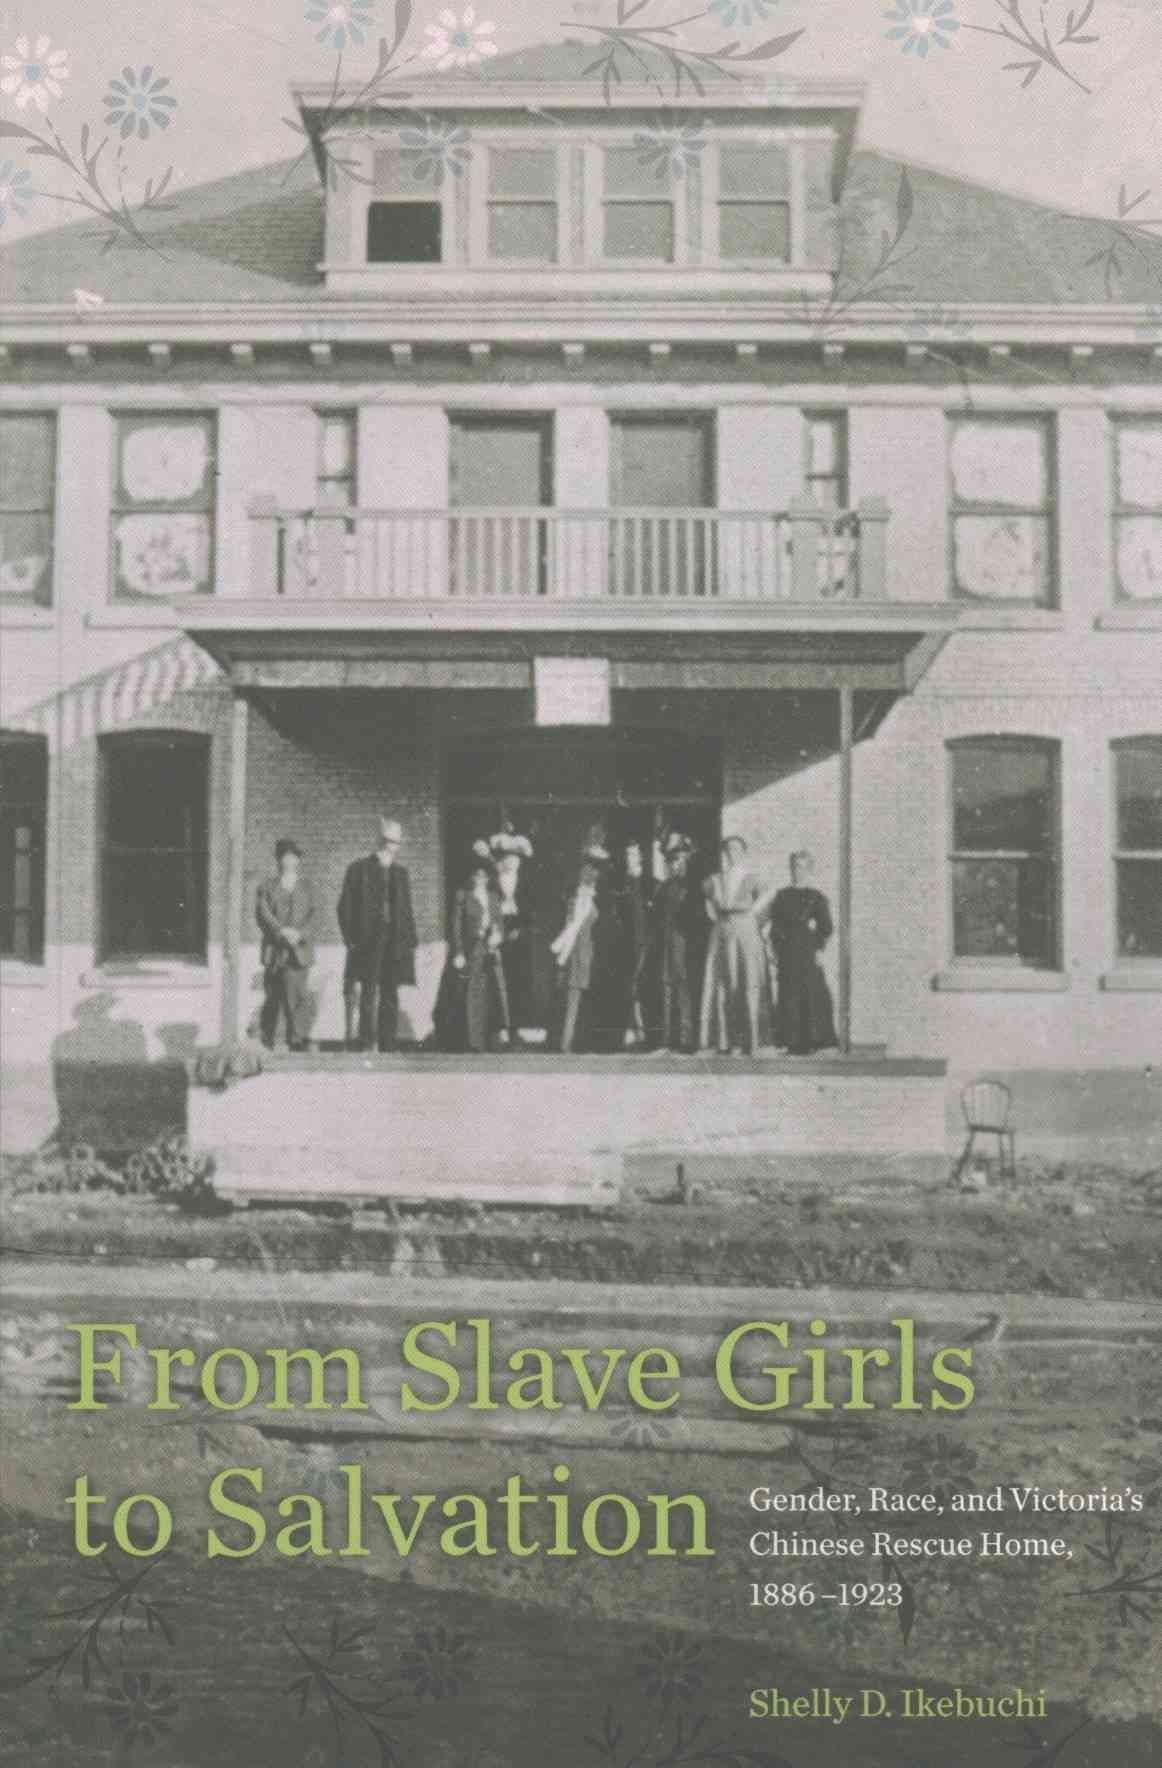 From Slave Girls to Salvation